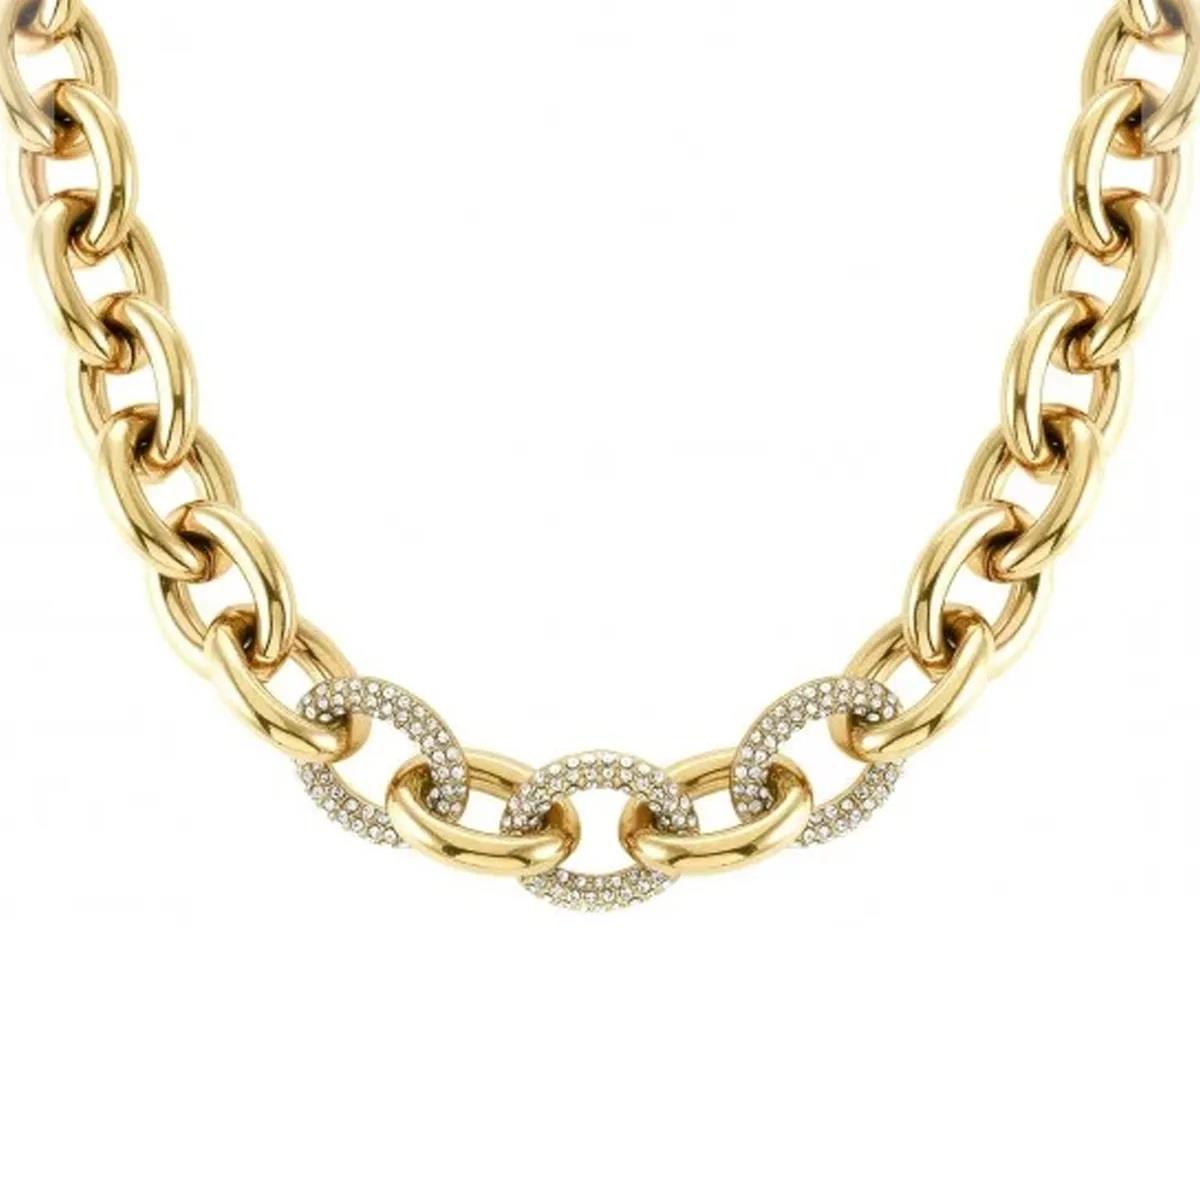 Affinity necklace in gold steel - NOMINATION